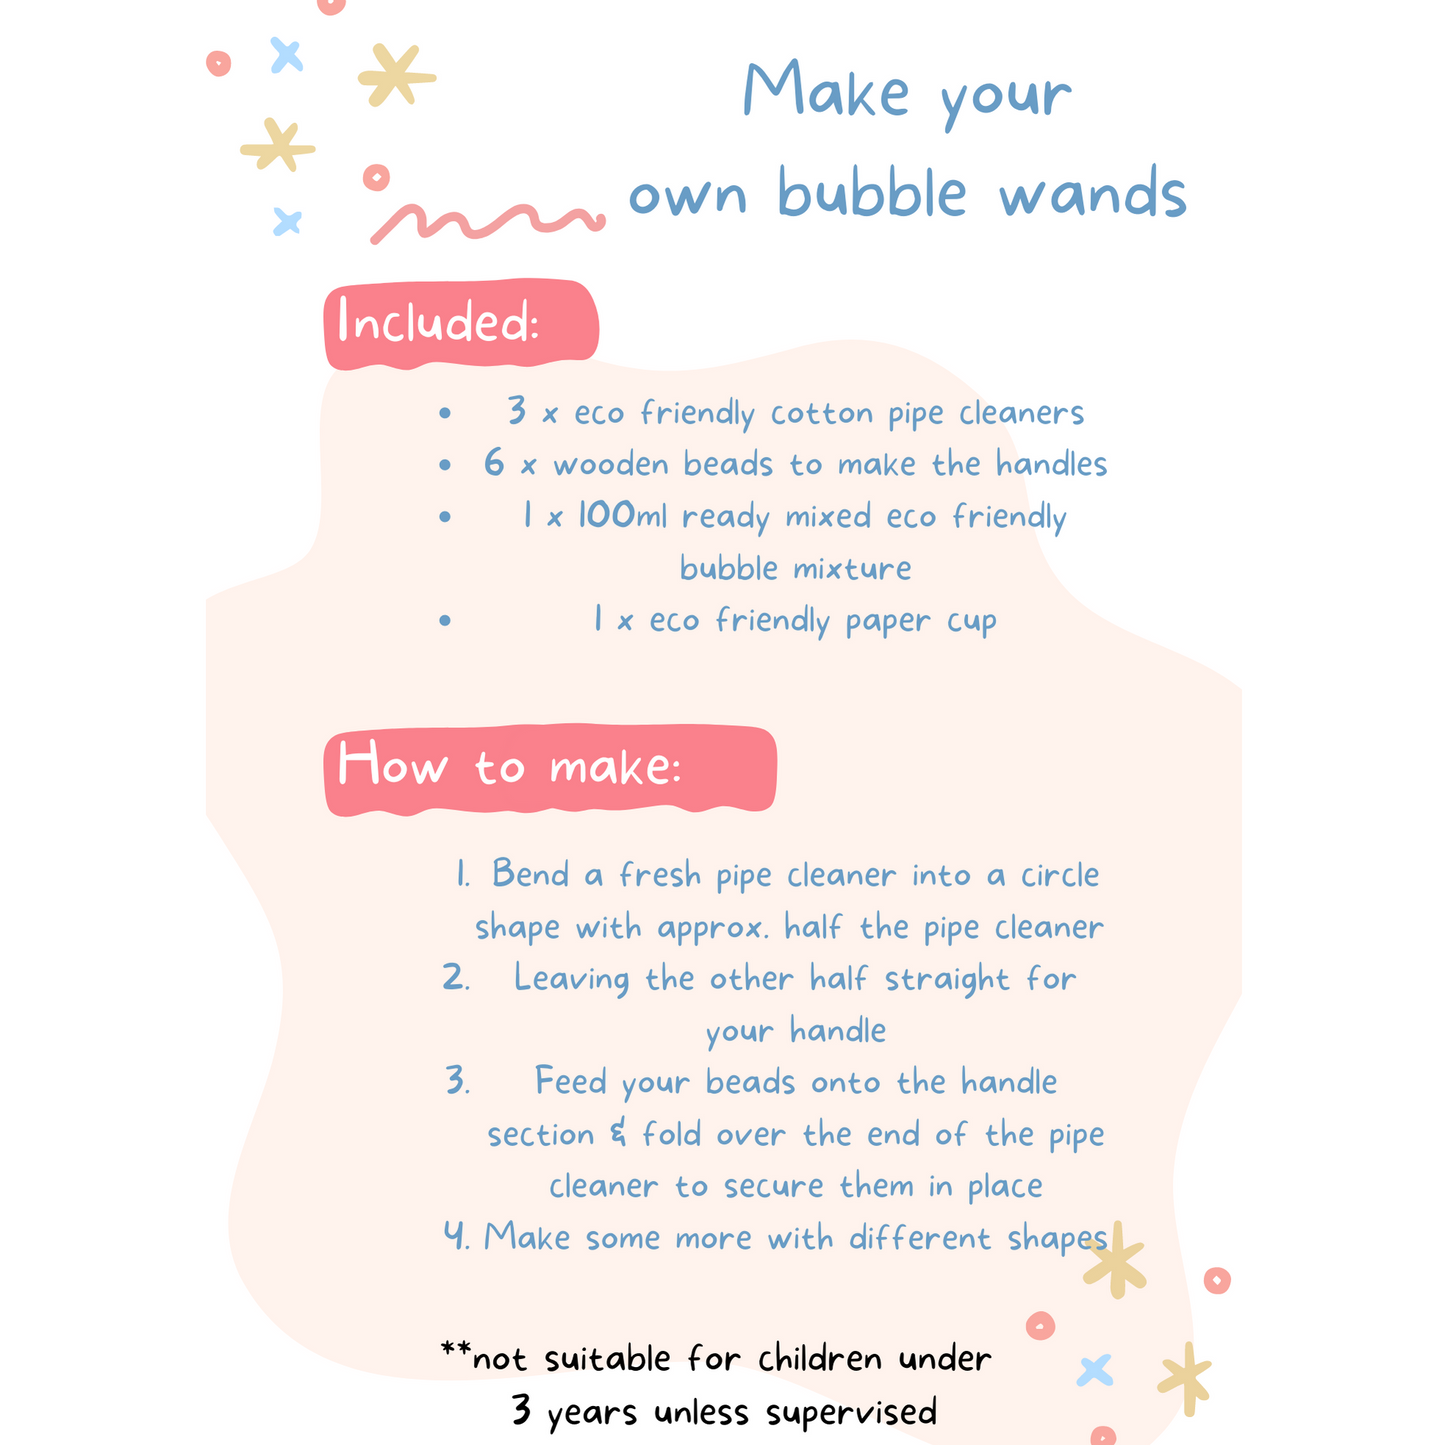 Make Your Own Bubble Wands Kit